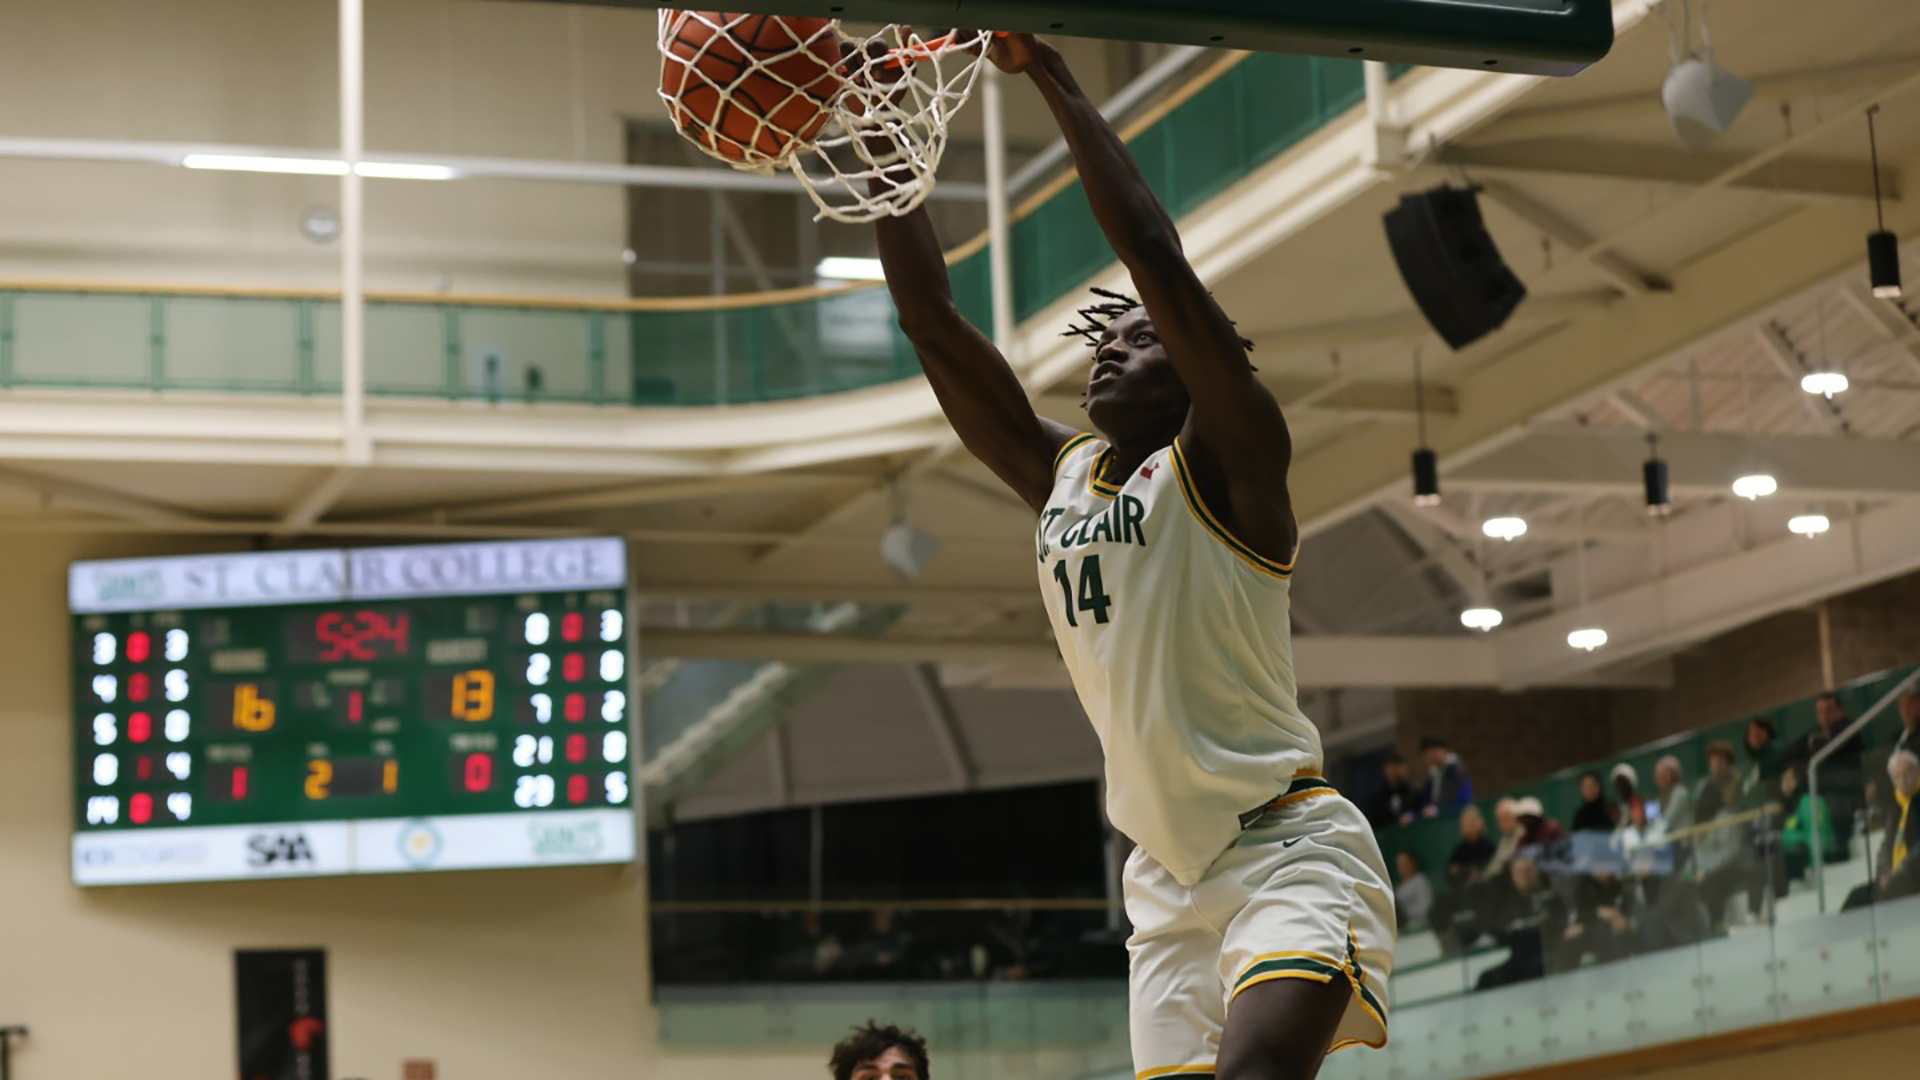 Men’s Basketball 12-3 After Lopsided Win over Canadore